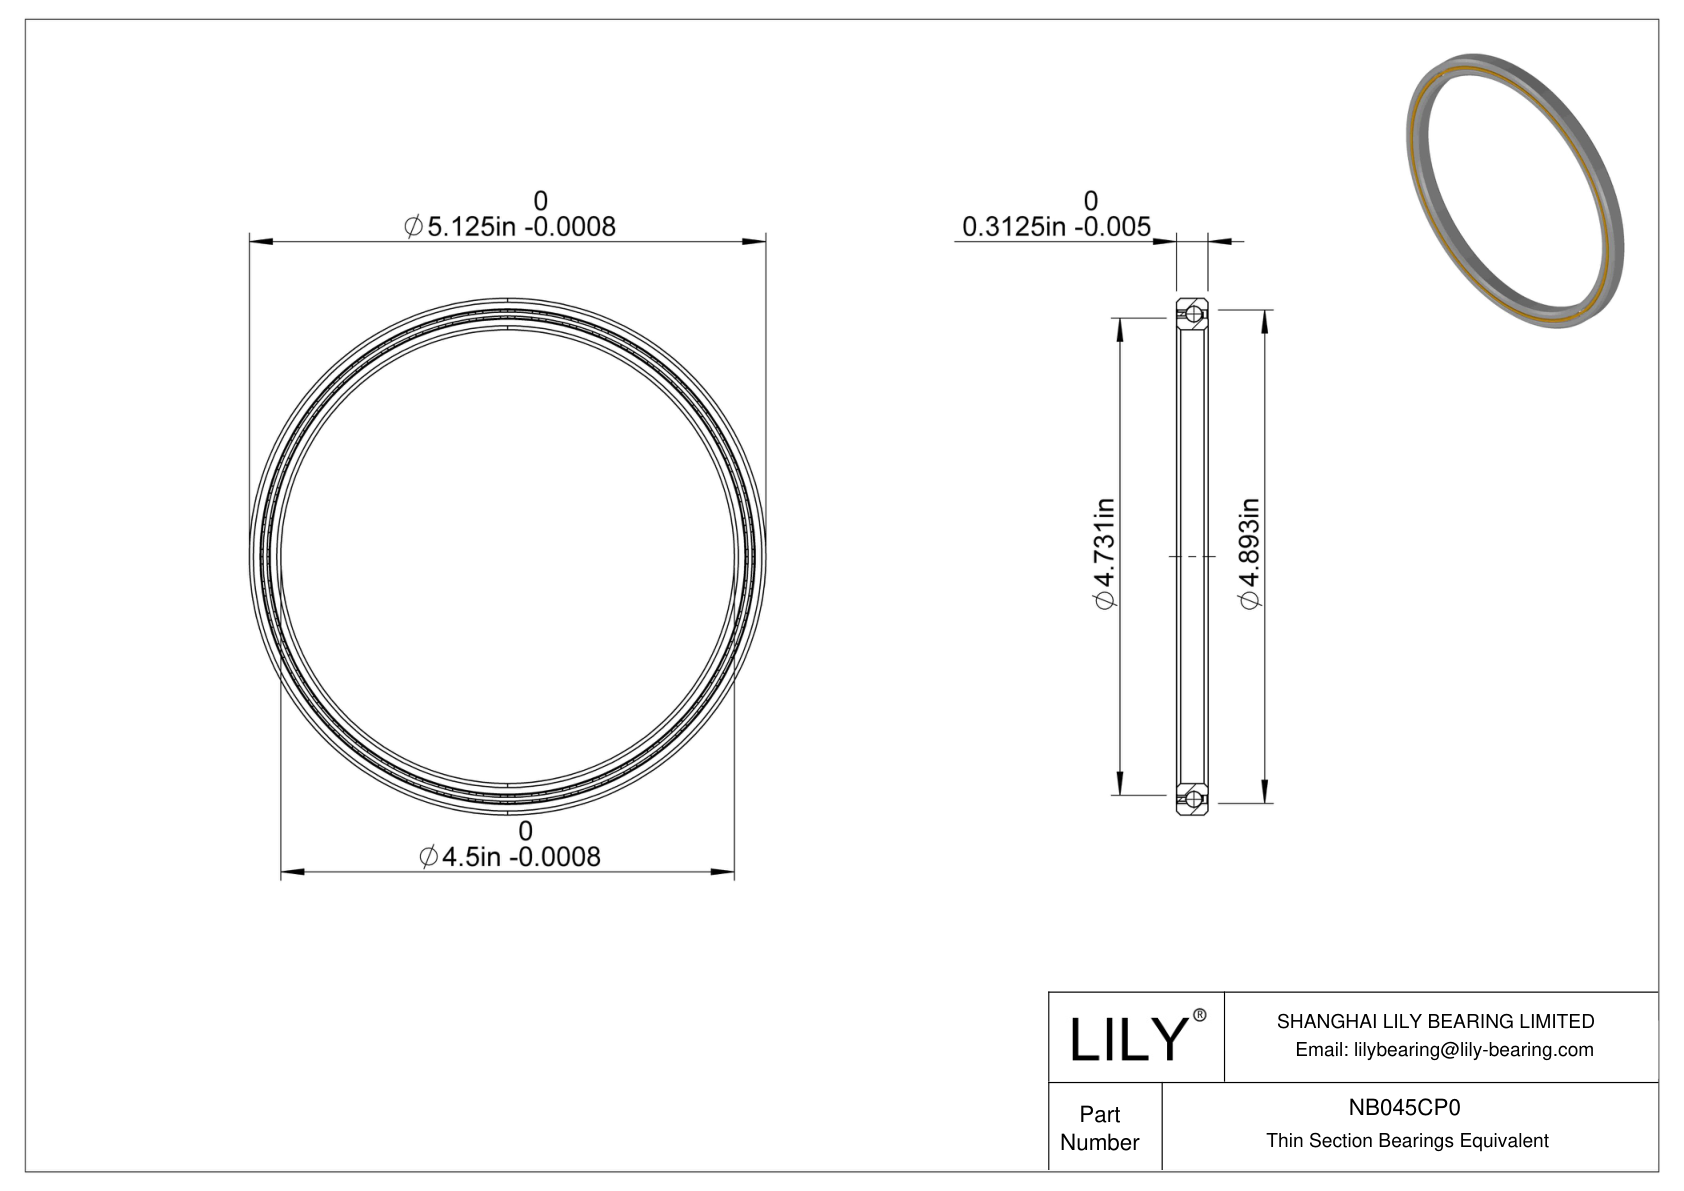 NB045CP0 Constant Section (CS) Bearings cad drawing